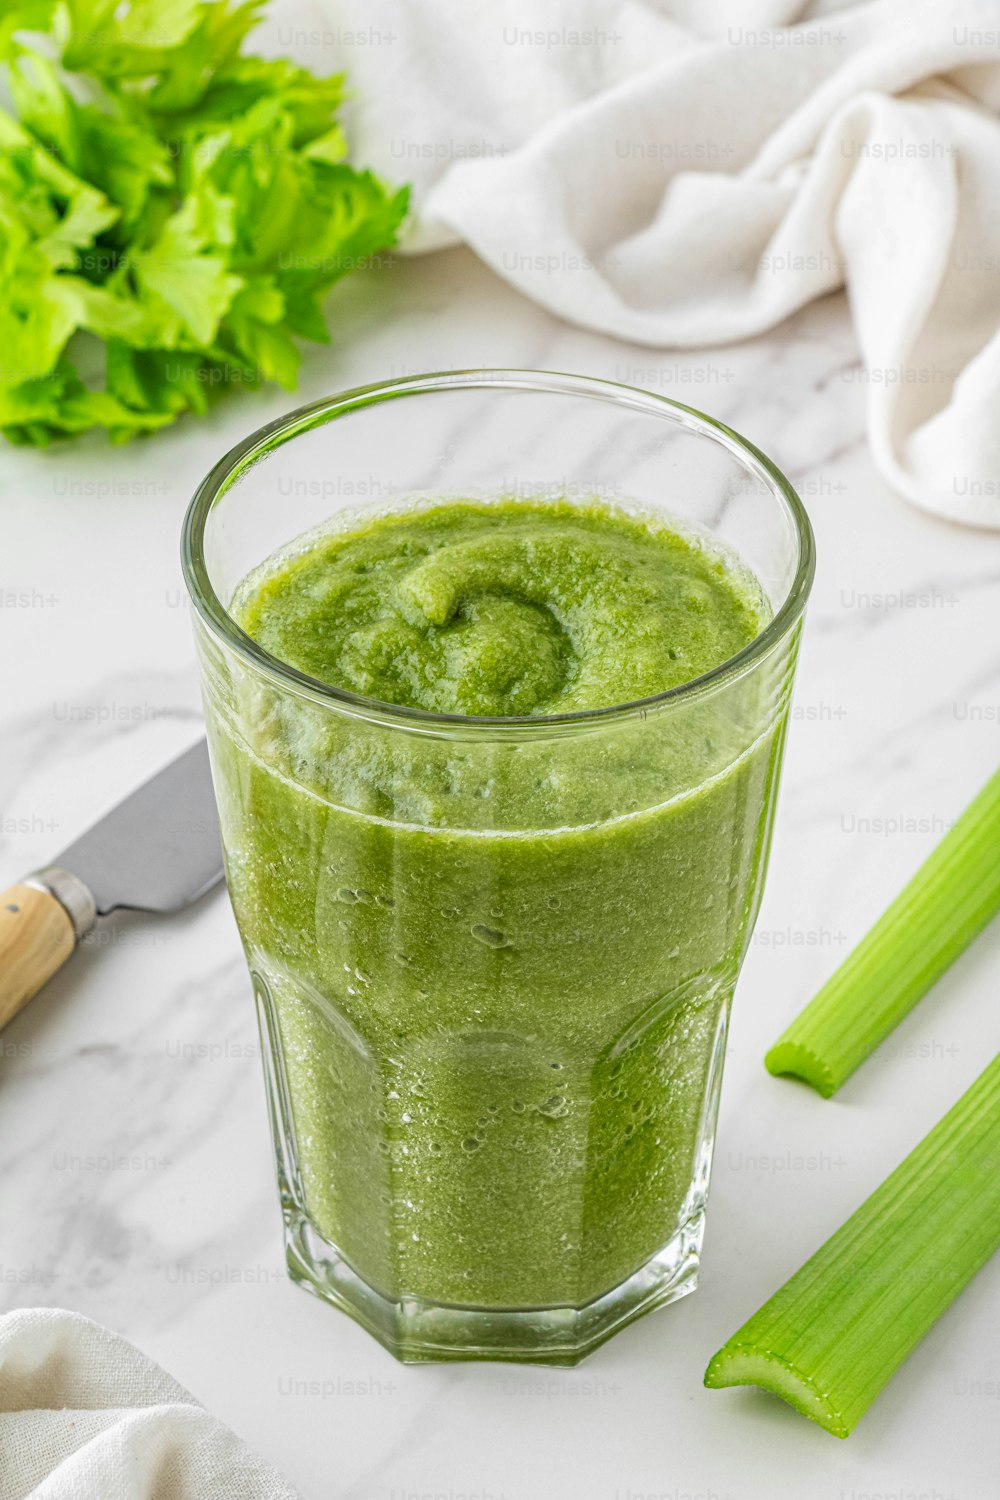 a glass filled with green liquid next to celery stalks